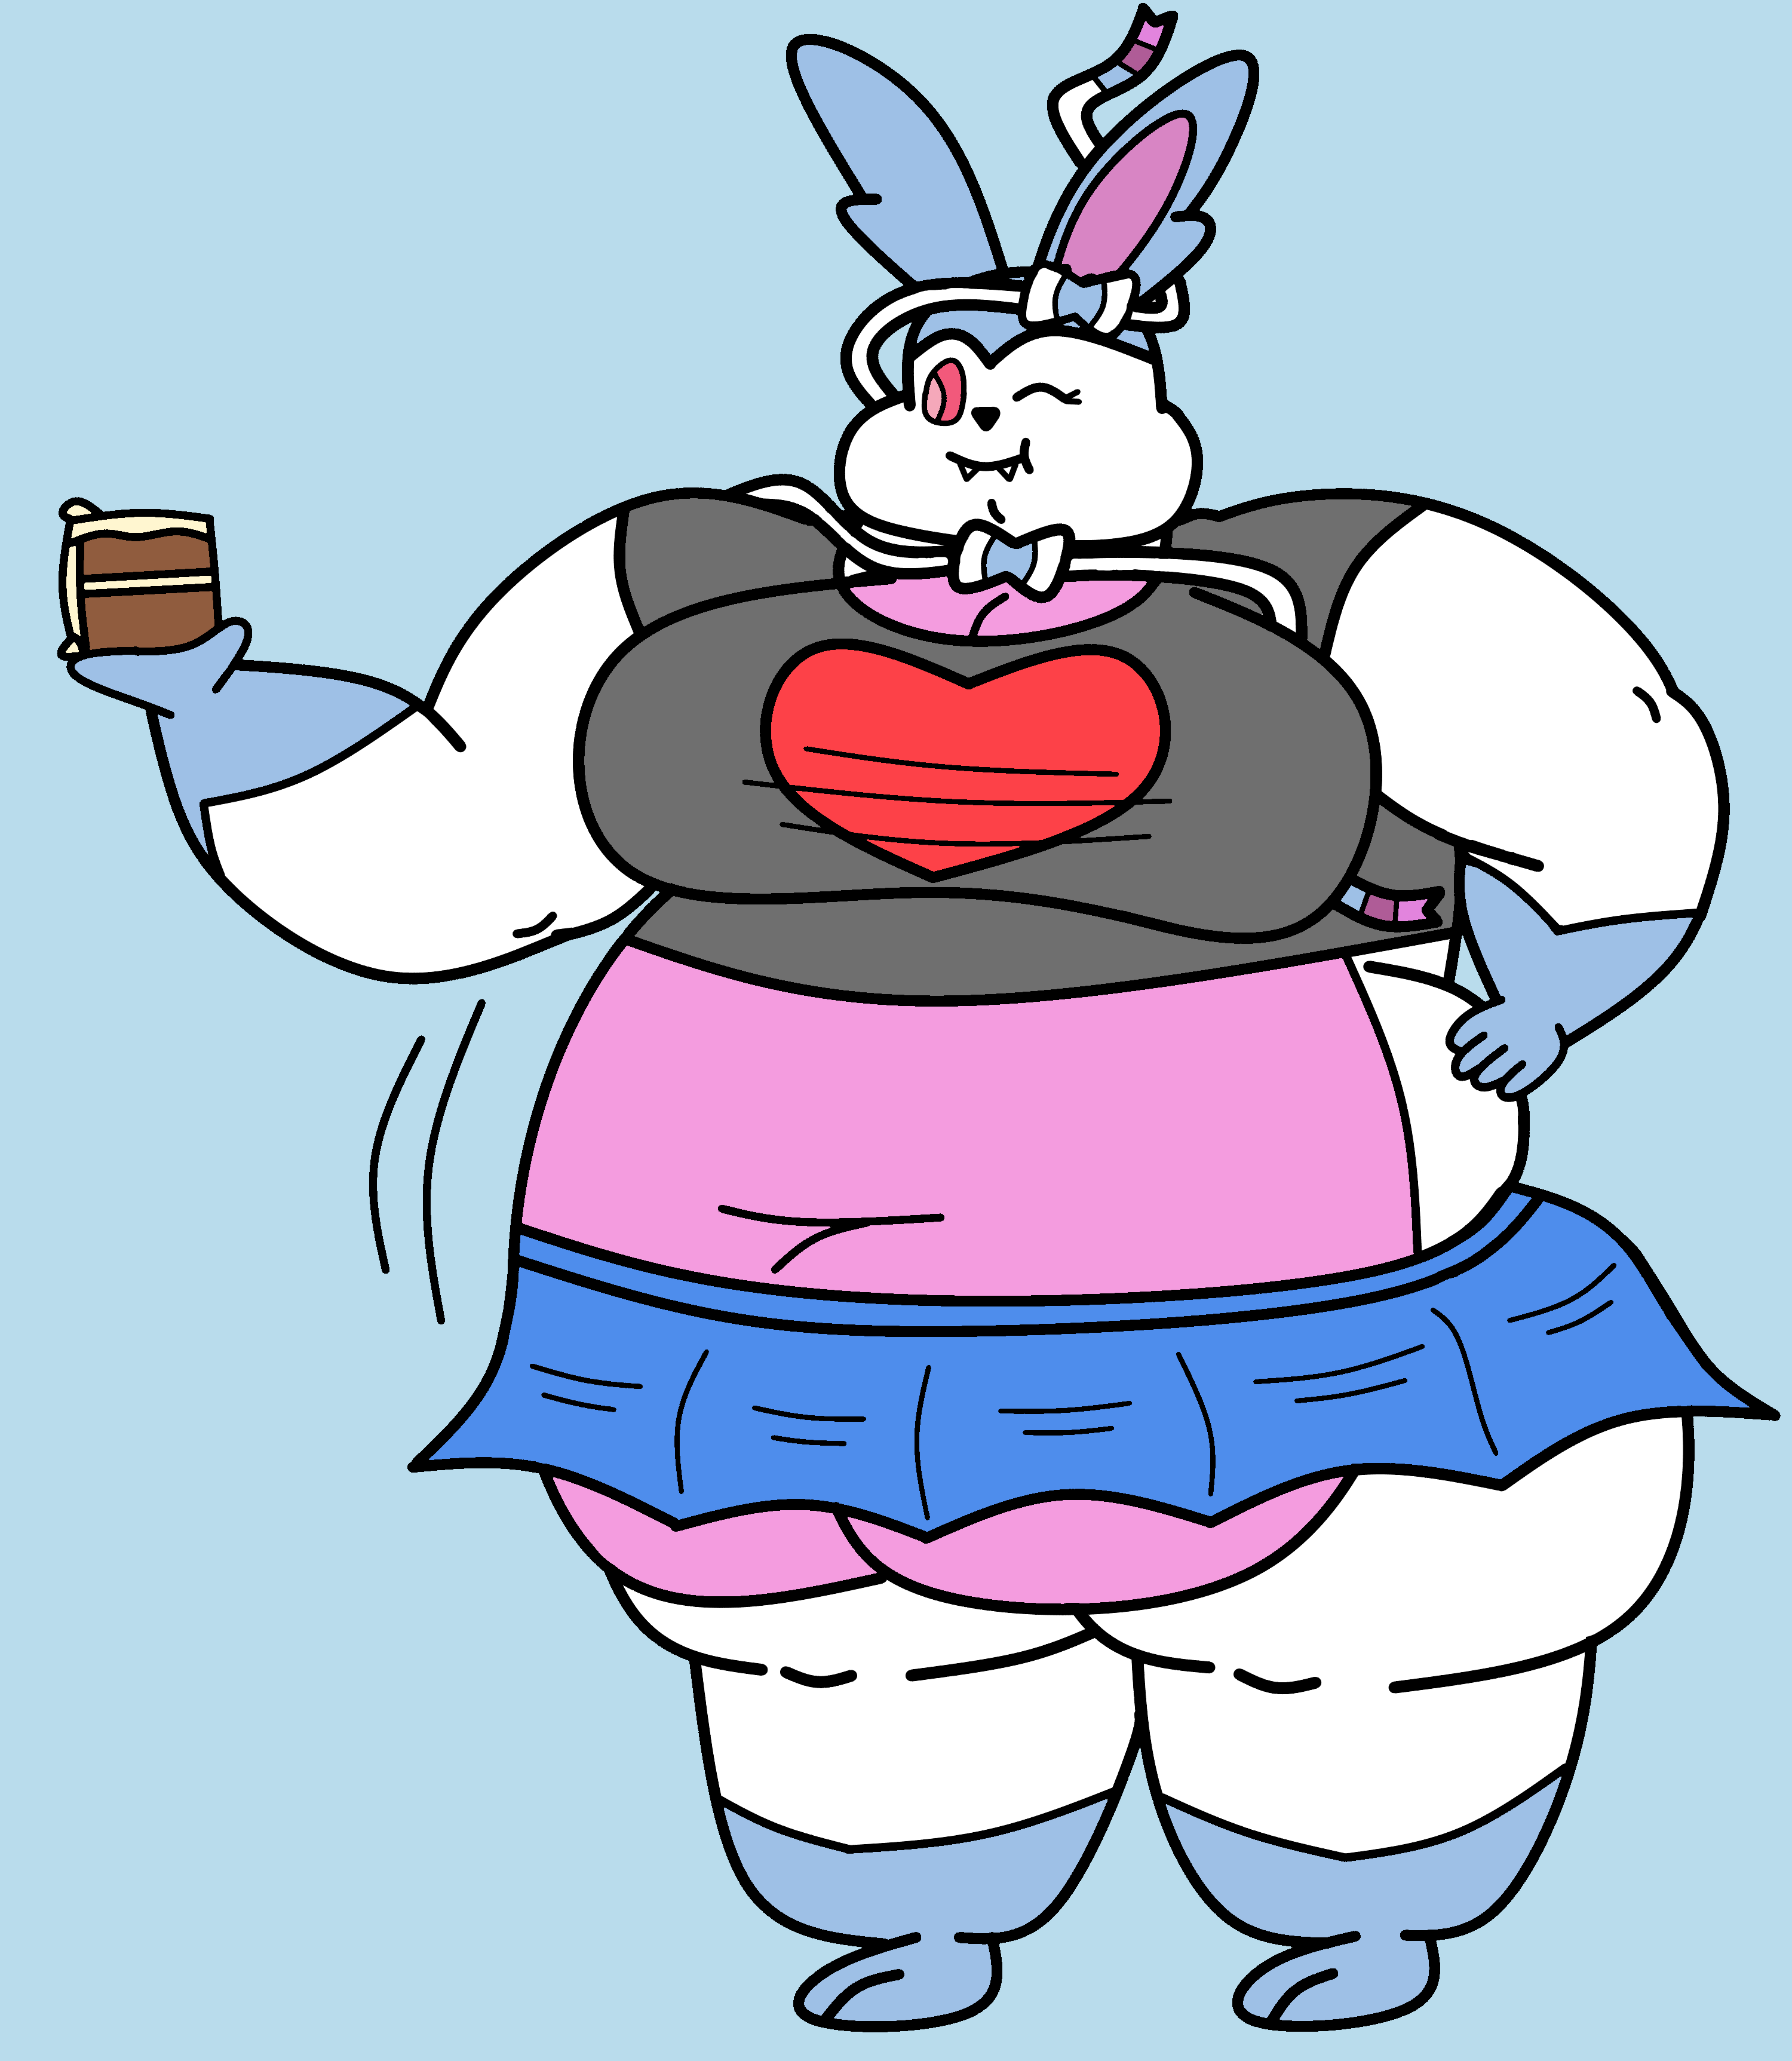 Fatty Cheer-gainer Sugarly! by theuser805 on DeviantArt